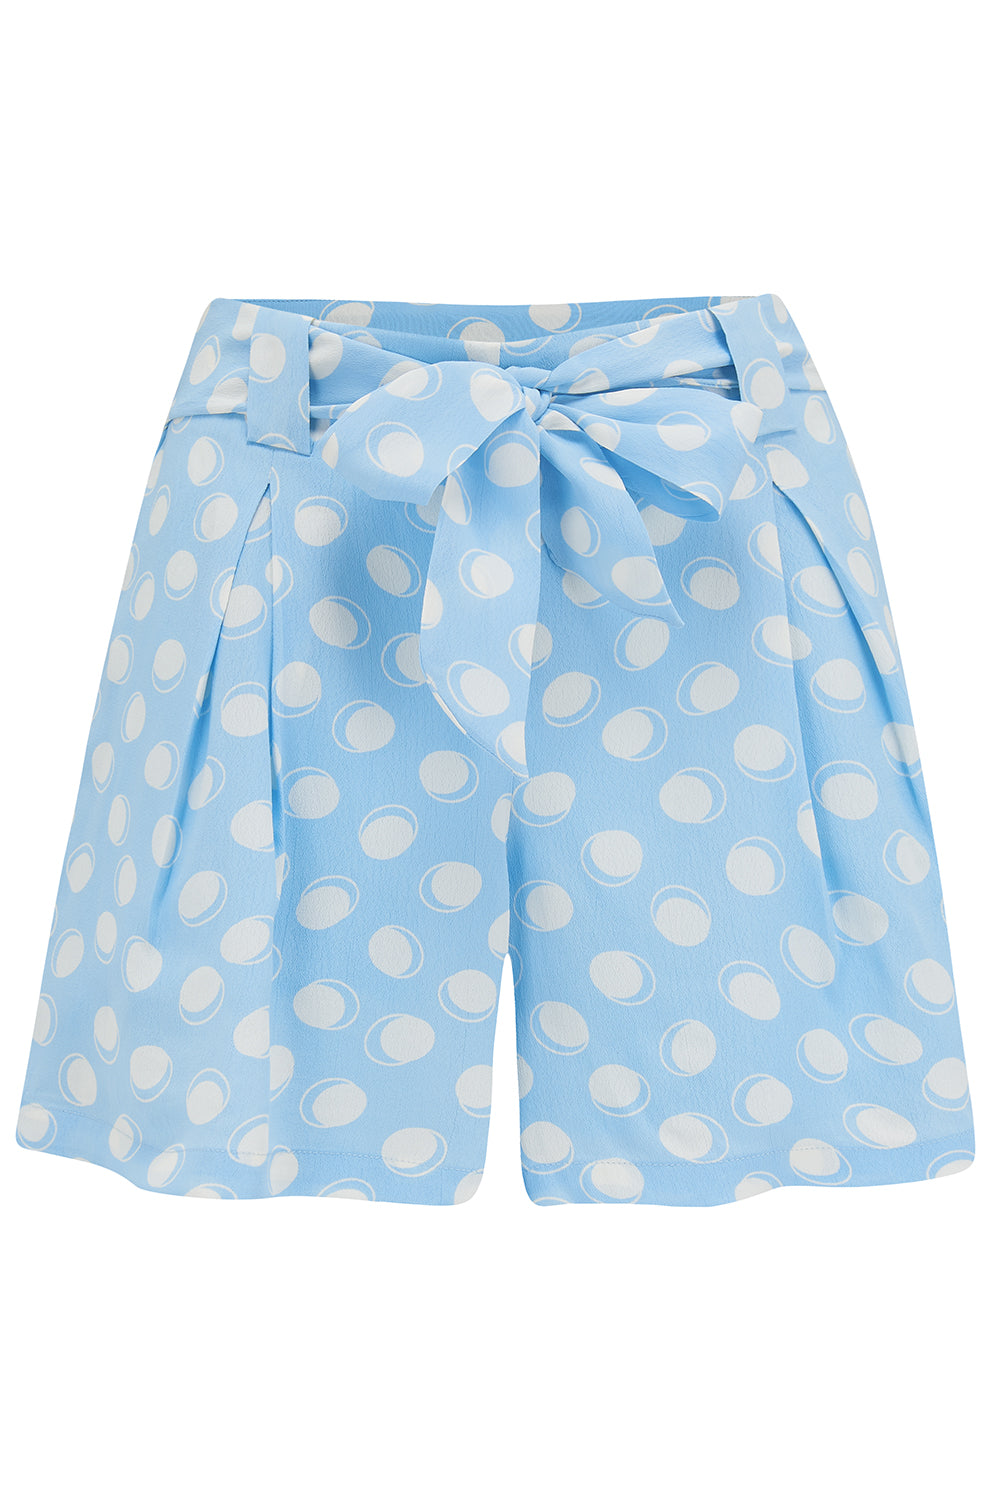 Emma vintage styled Tap Shorts in Sky Blue Moon Shine - True and authentic vintage style clothing, inspired by the Classic styles of CC41 , WW2 and the fun 1950s RocknRoll era, for everyday wear plus events like Goodwood Revival, Twinwood Festival and Viva Las Vegas Rockabilly Weekend Rock n Romance The Seamstress Of Bloomsbury